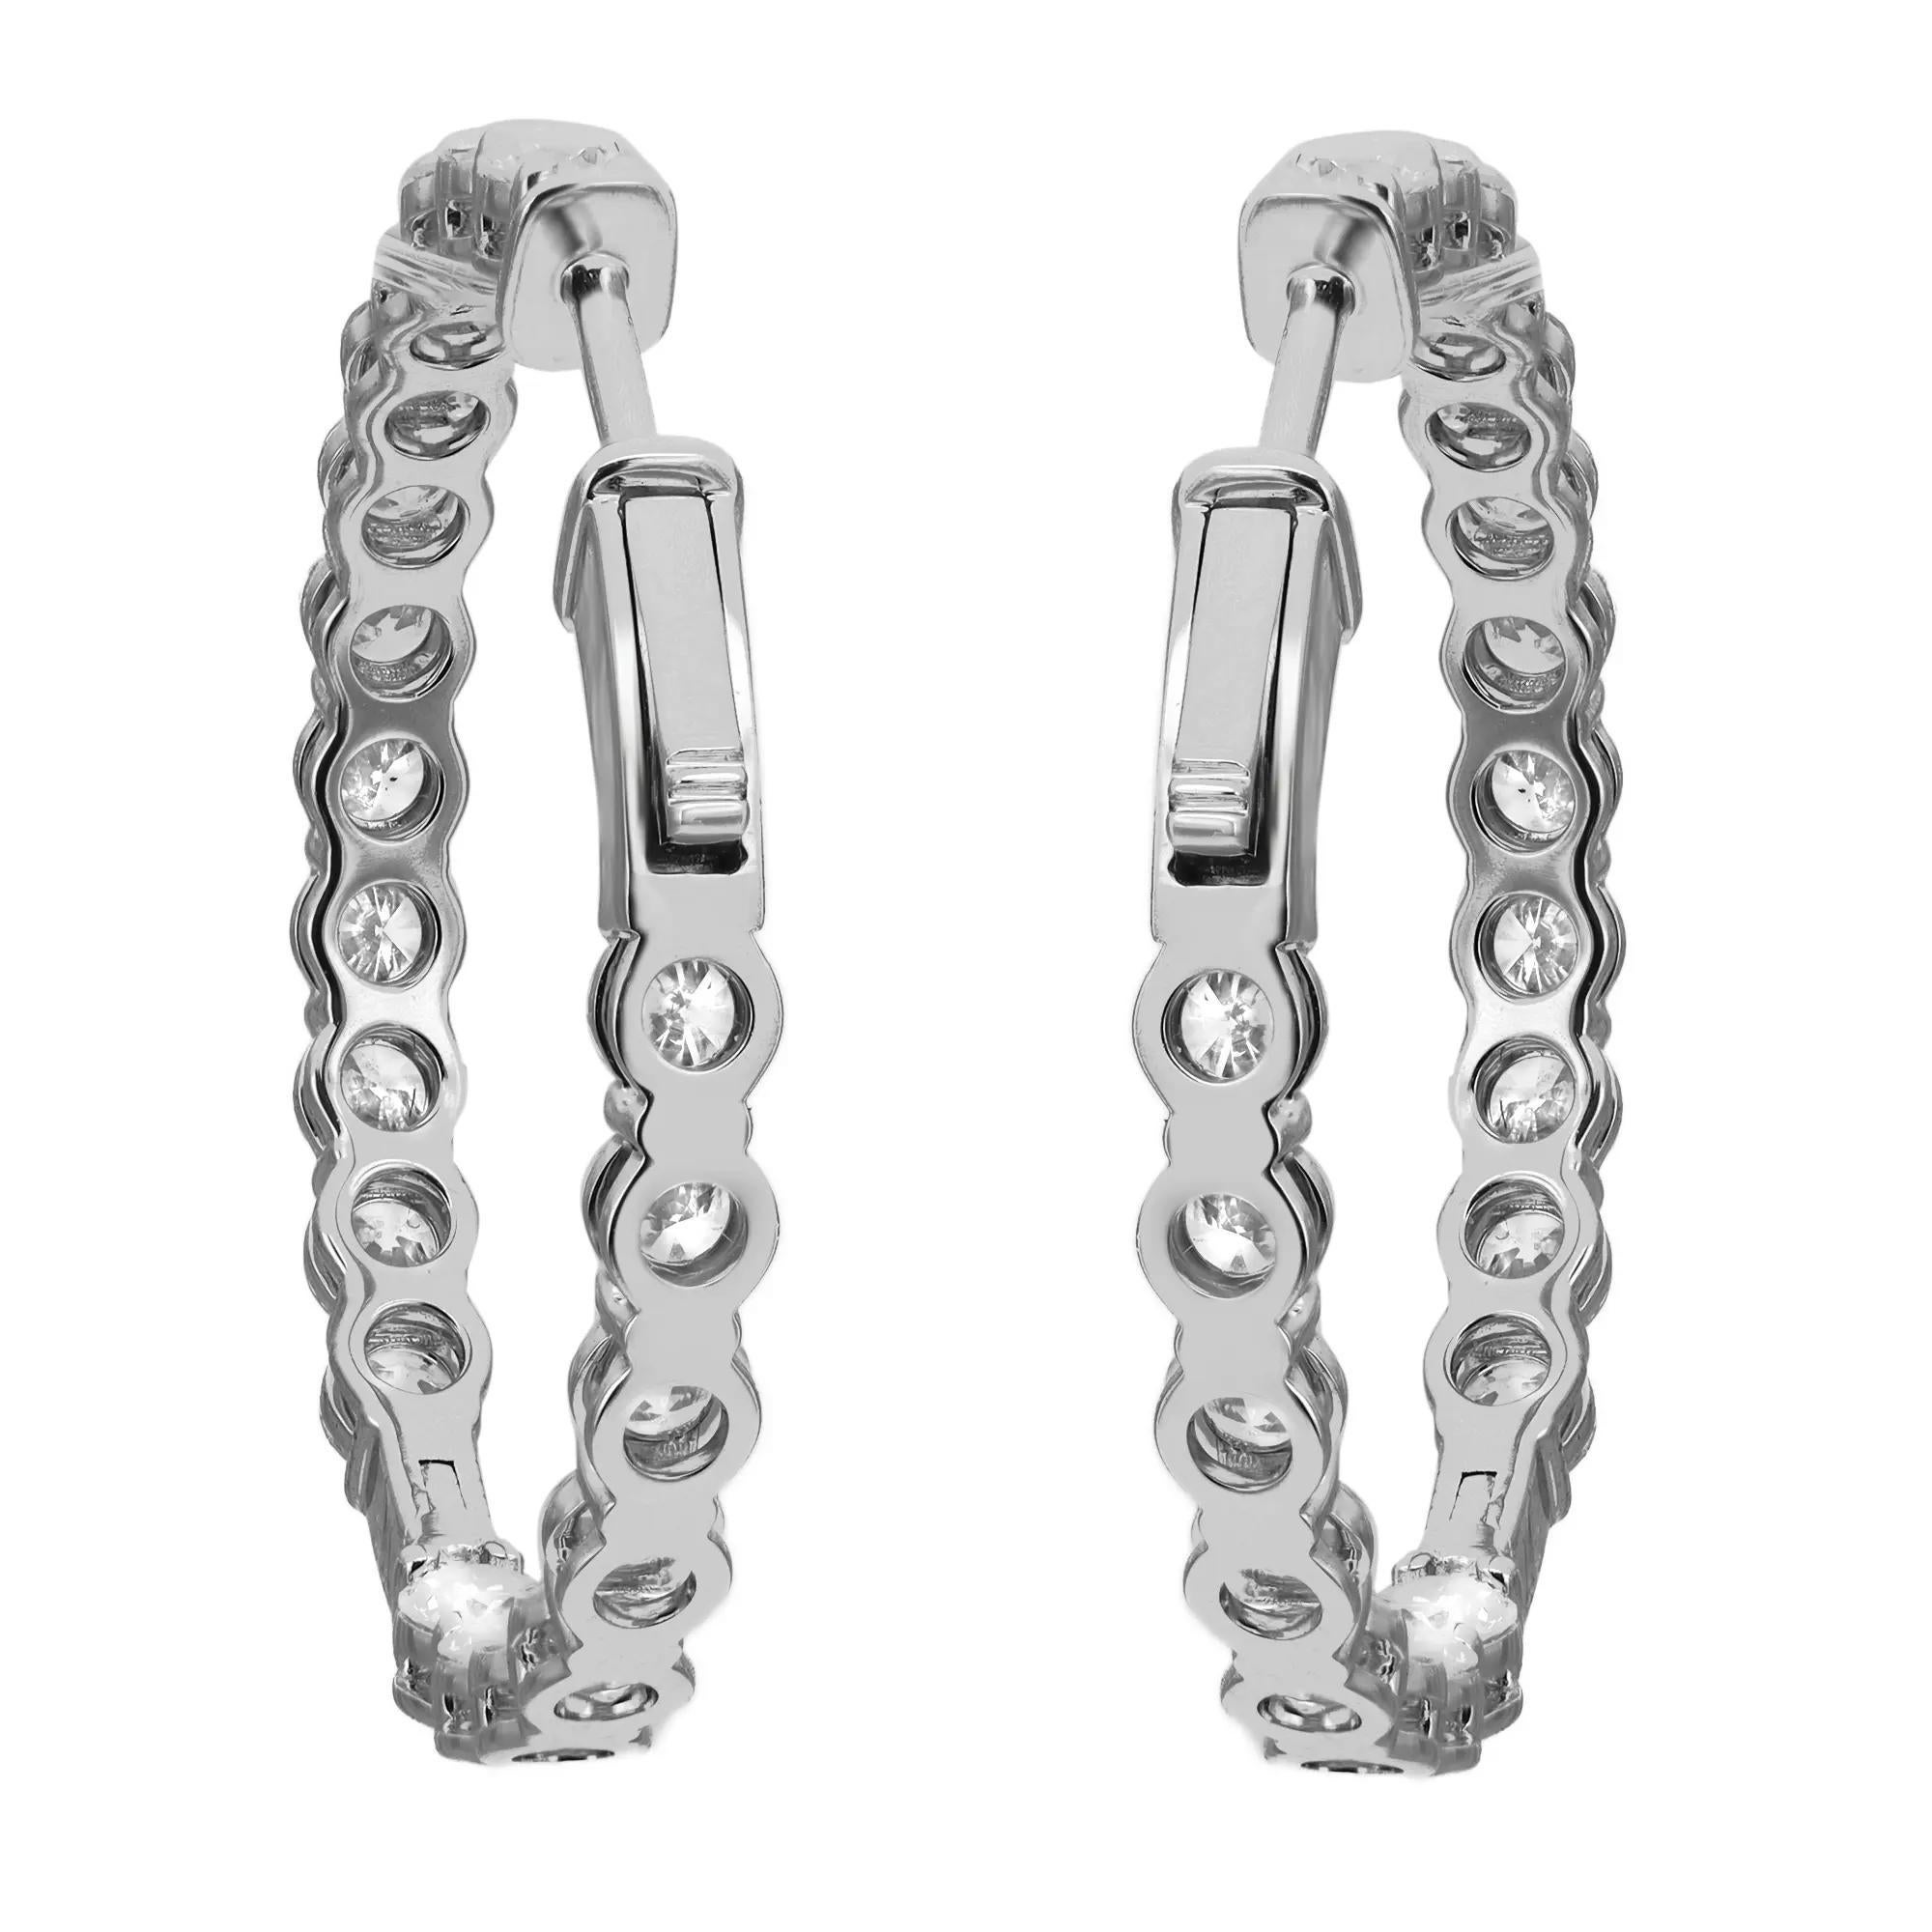 These stylish and elegant lab grown diamond inside out hoop earrings feature 40 prong-set round brilliant cut lab grown diamonds in a single line. The diamonds embellish these earrings on the inside and the outside, offering a dazzling look from